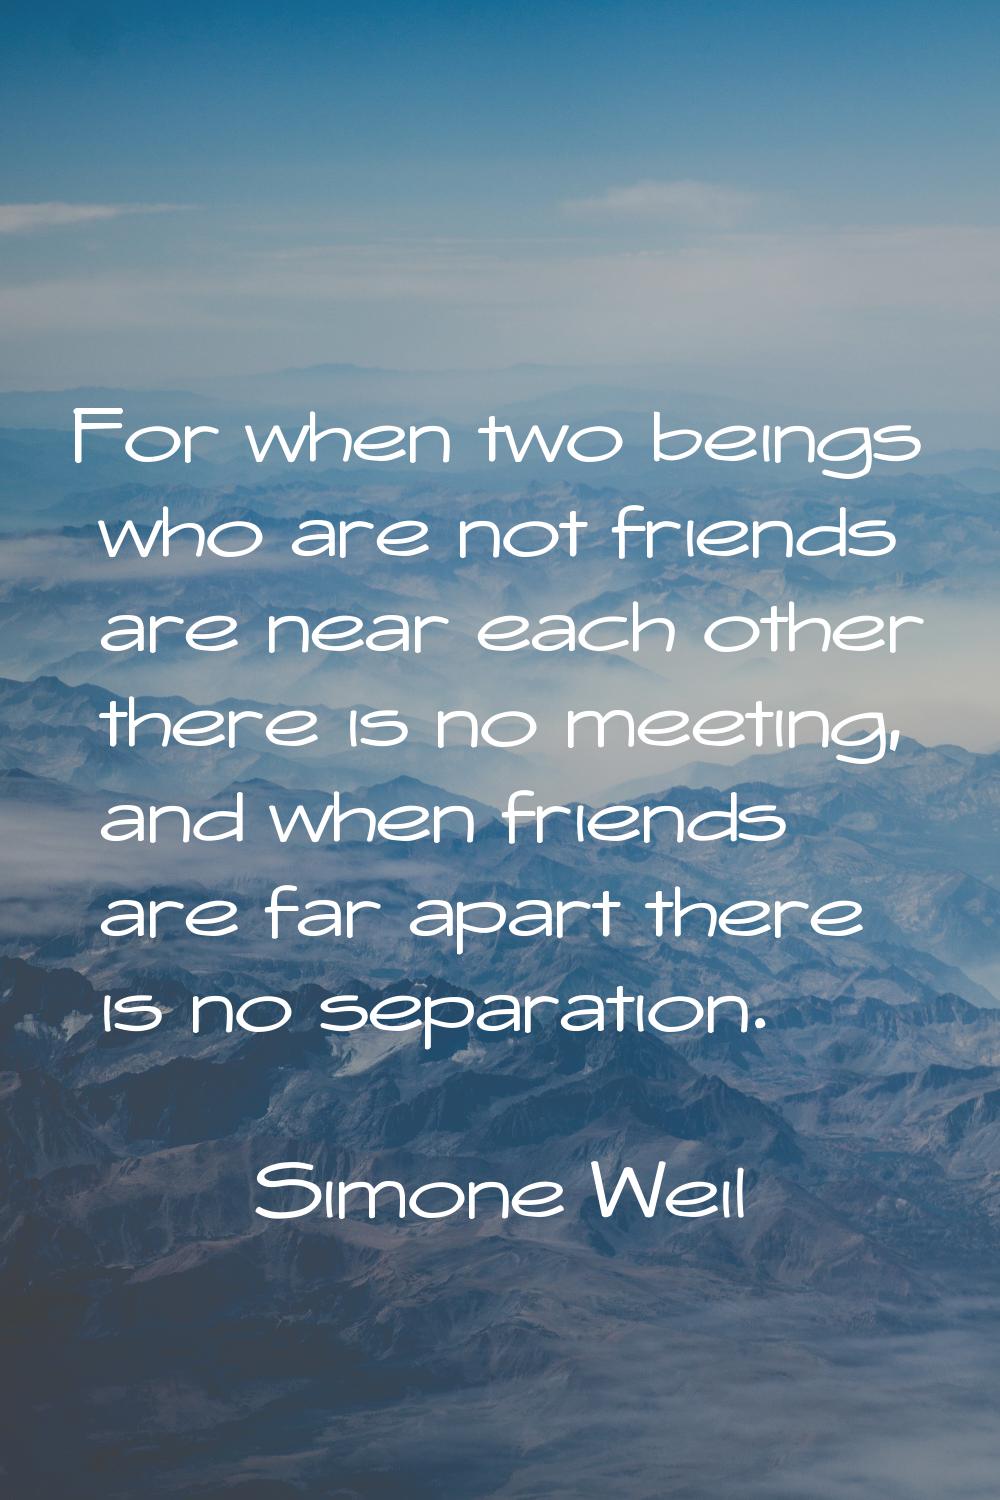 For when two beings who are not friends are near each other there is no meeting, and when friends a